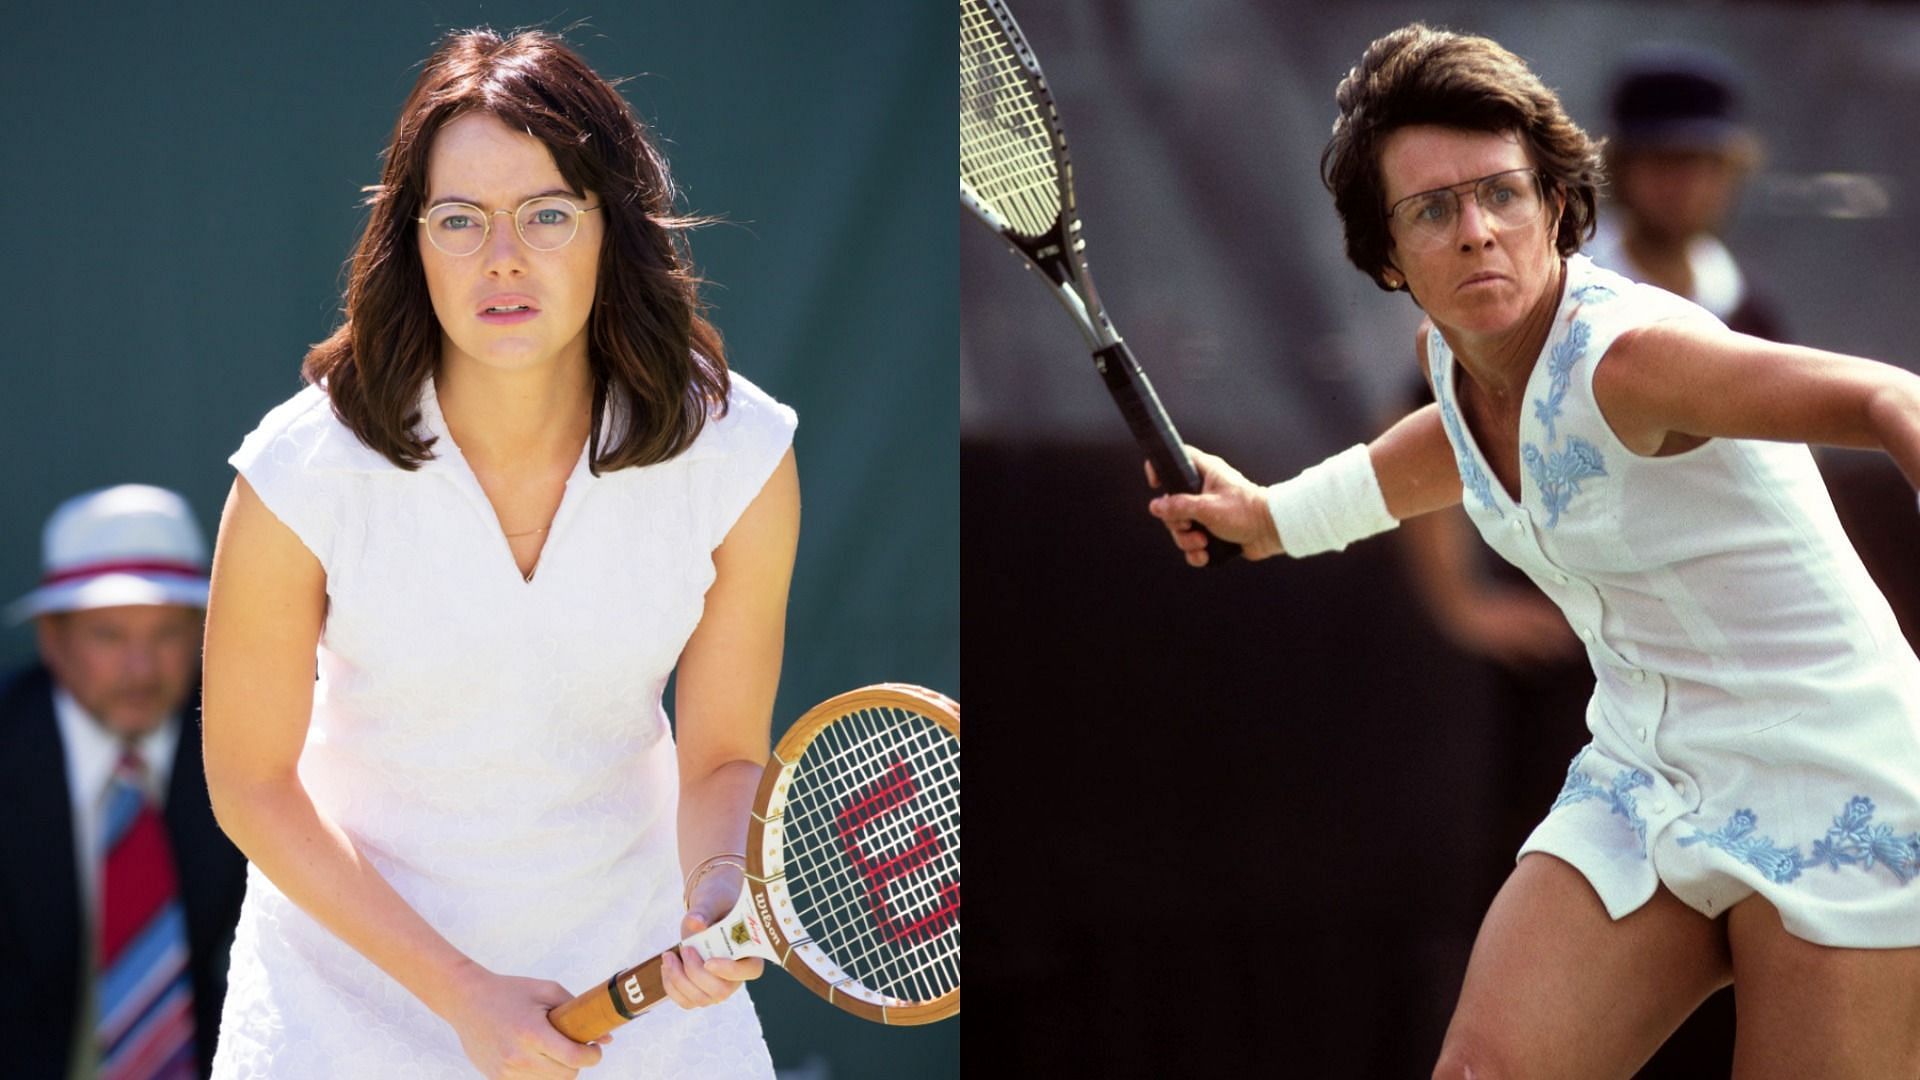 Emma Stone as Billie Jean King (Images via 20th Century Fox and Dreamstime.com)